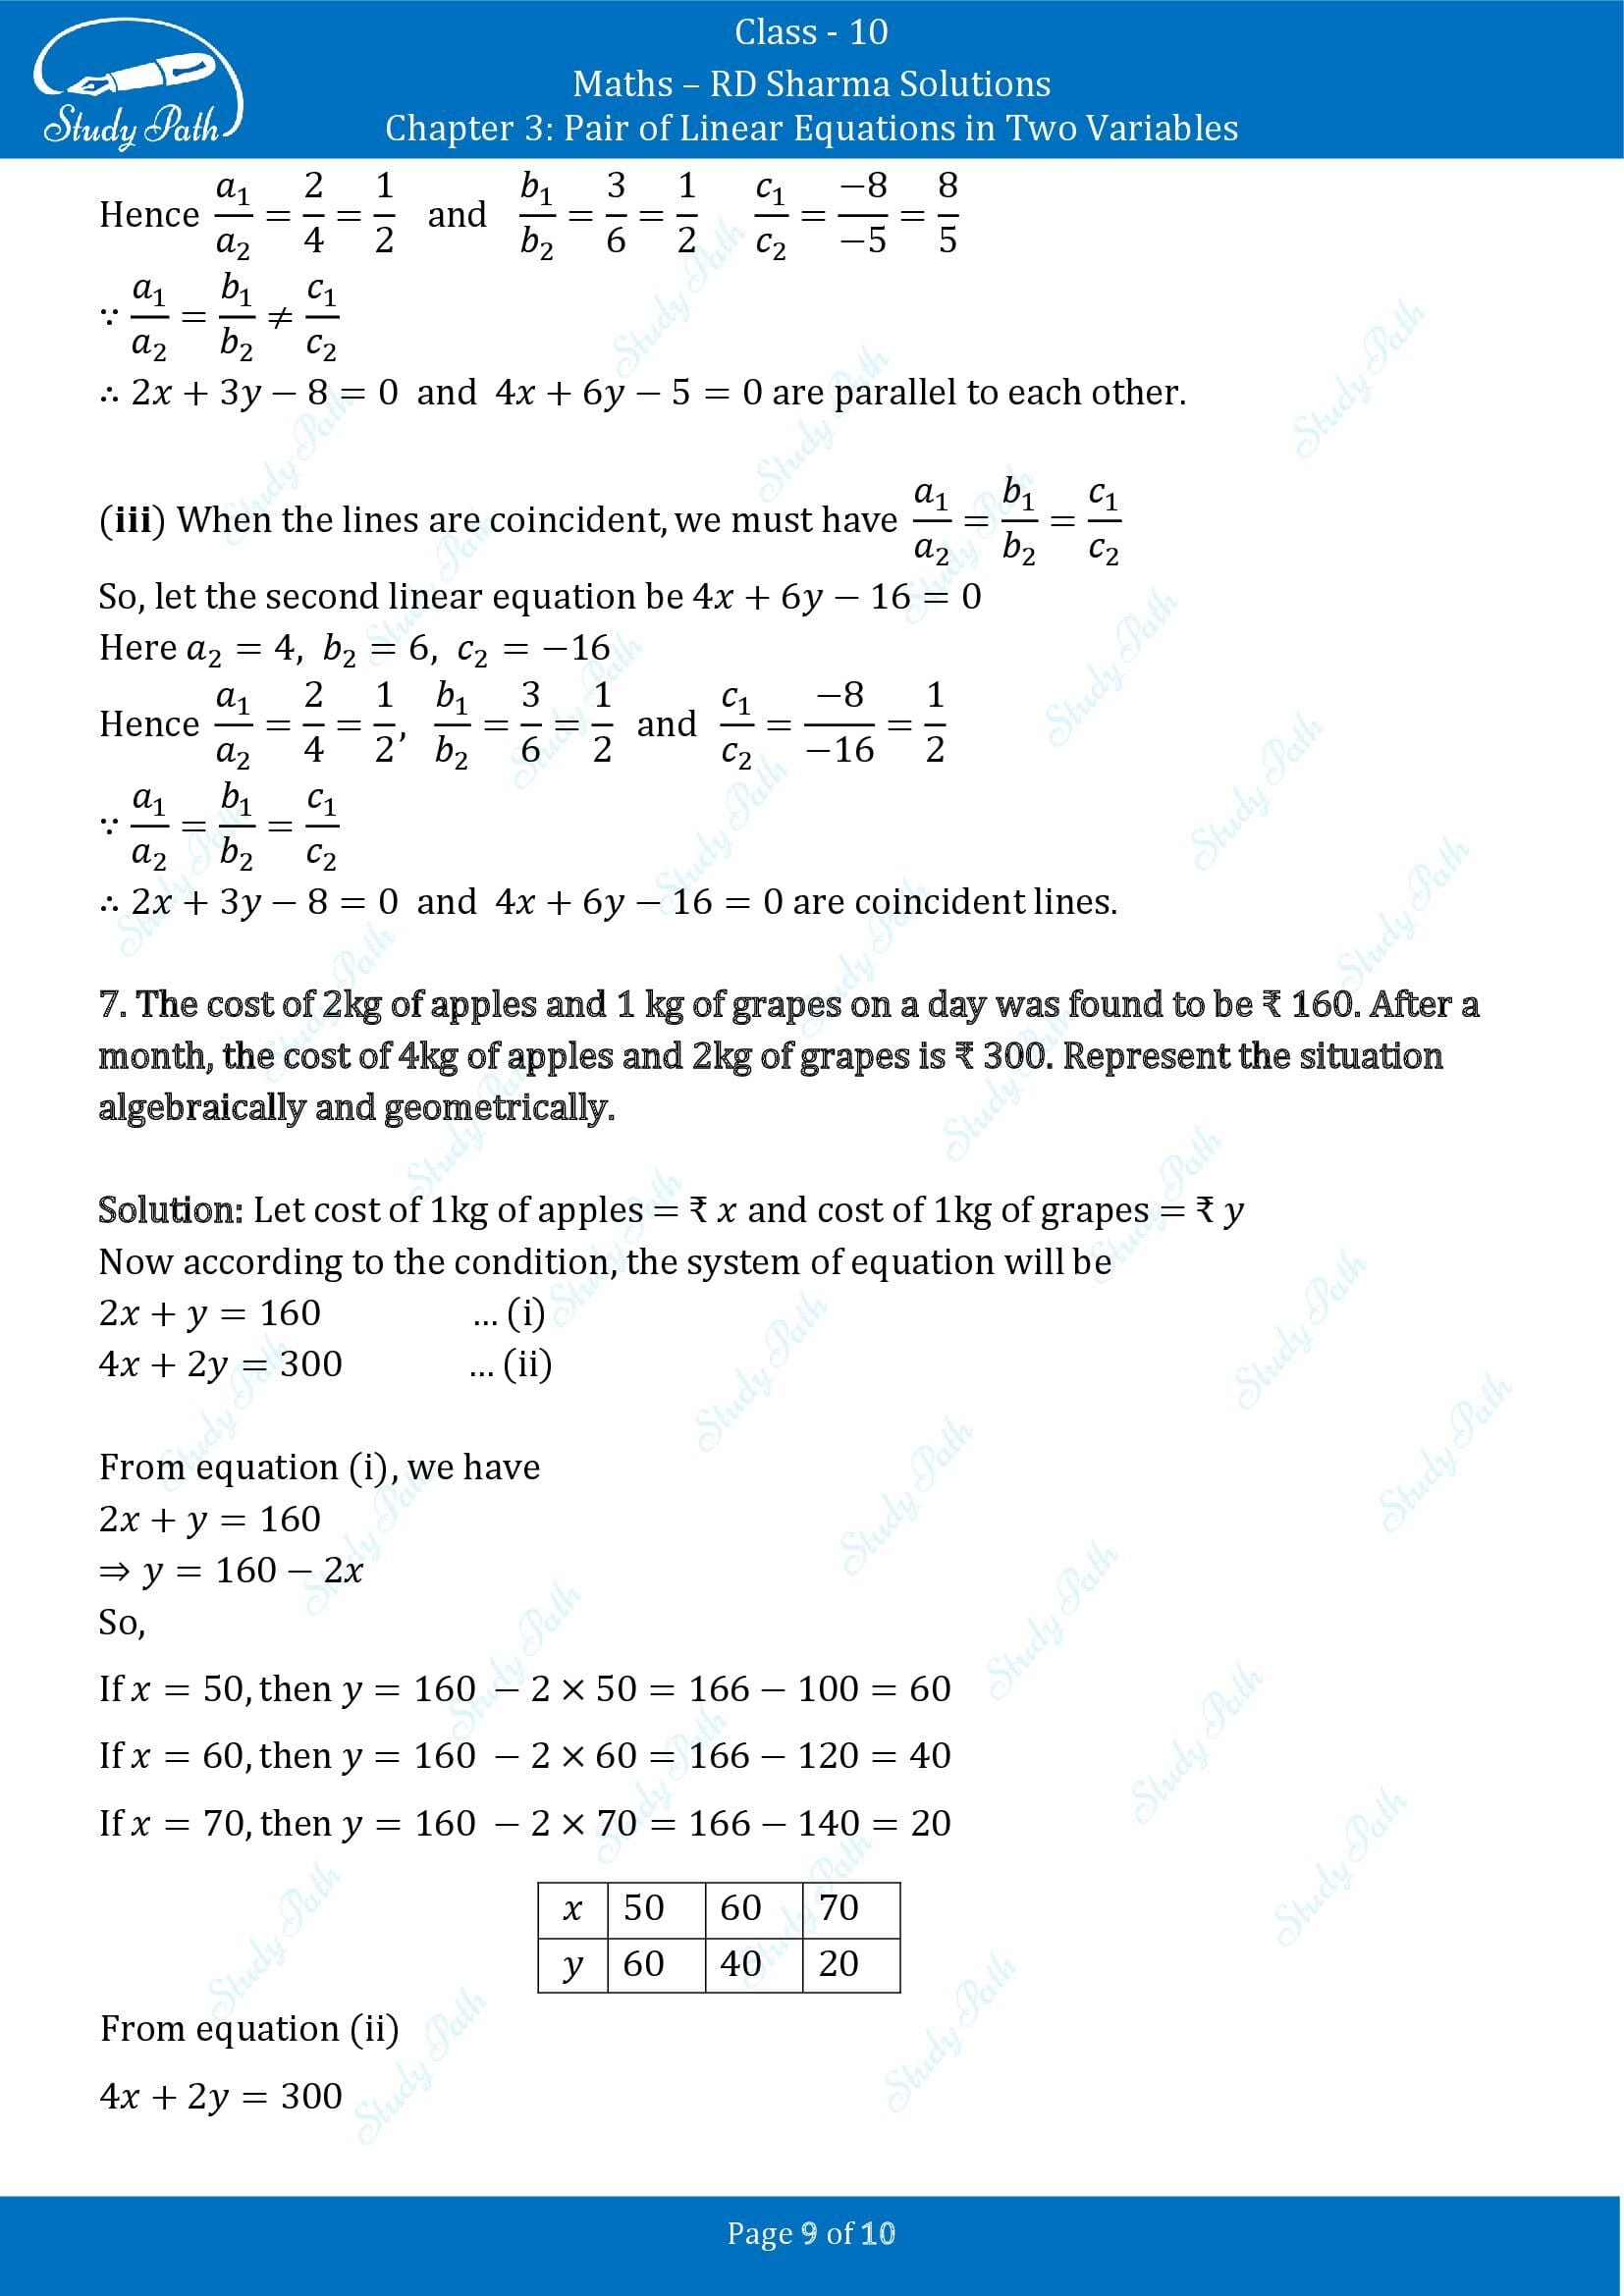 RD Sharma Solutions Class 10 Chapter 3 Pair of Linear Equations in Two Variables Exercise 3.1 00009